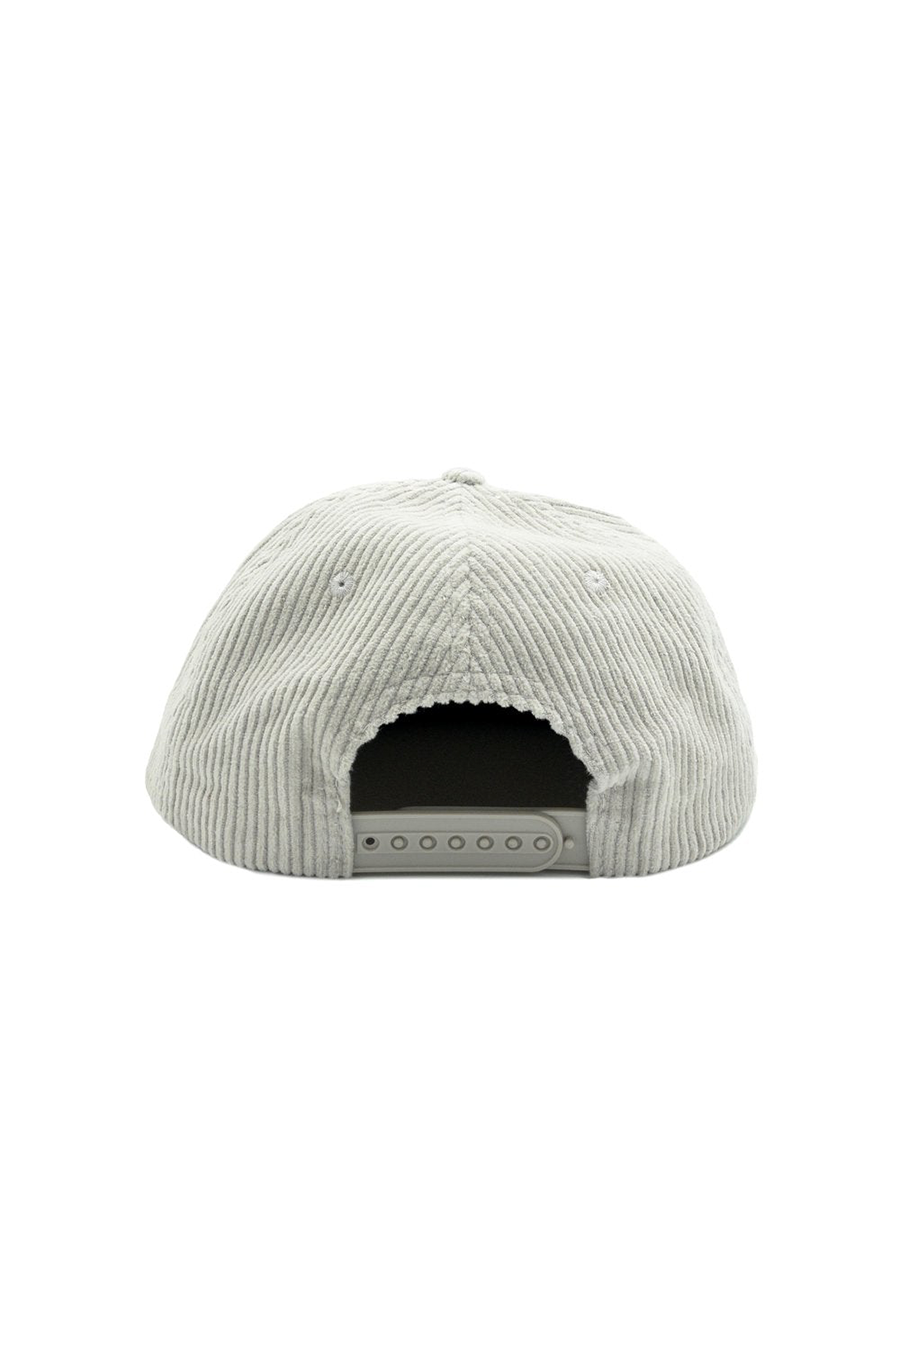 Free & Easy Fat Corduroy Snapback Hat | Light Grey - Main Image Number 2 of 2